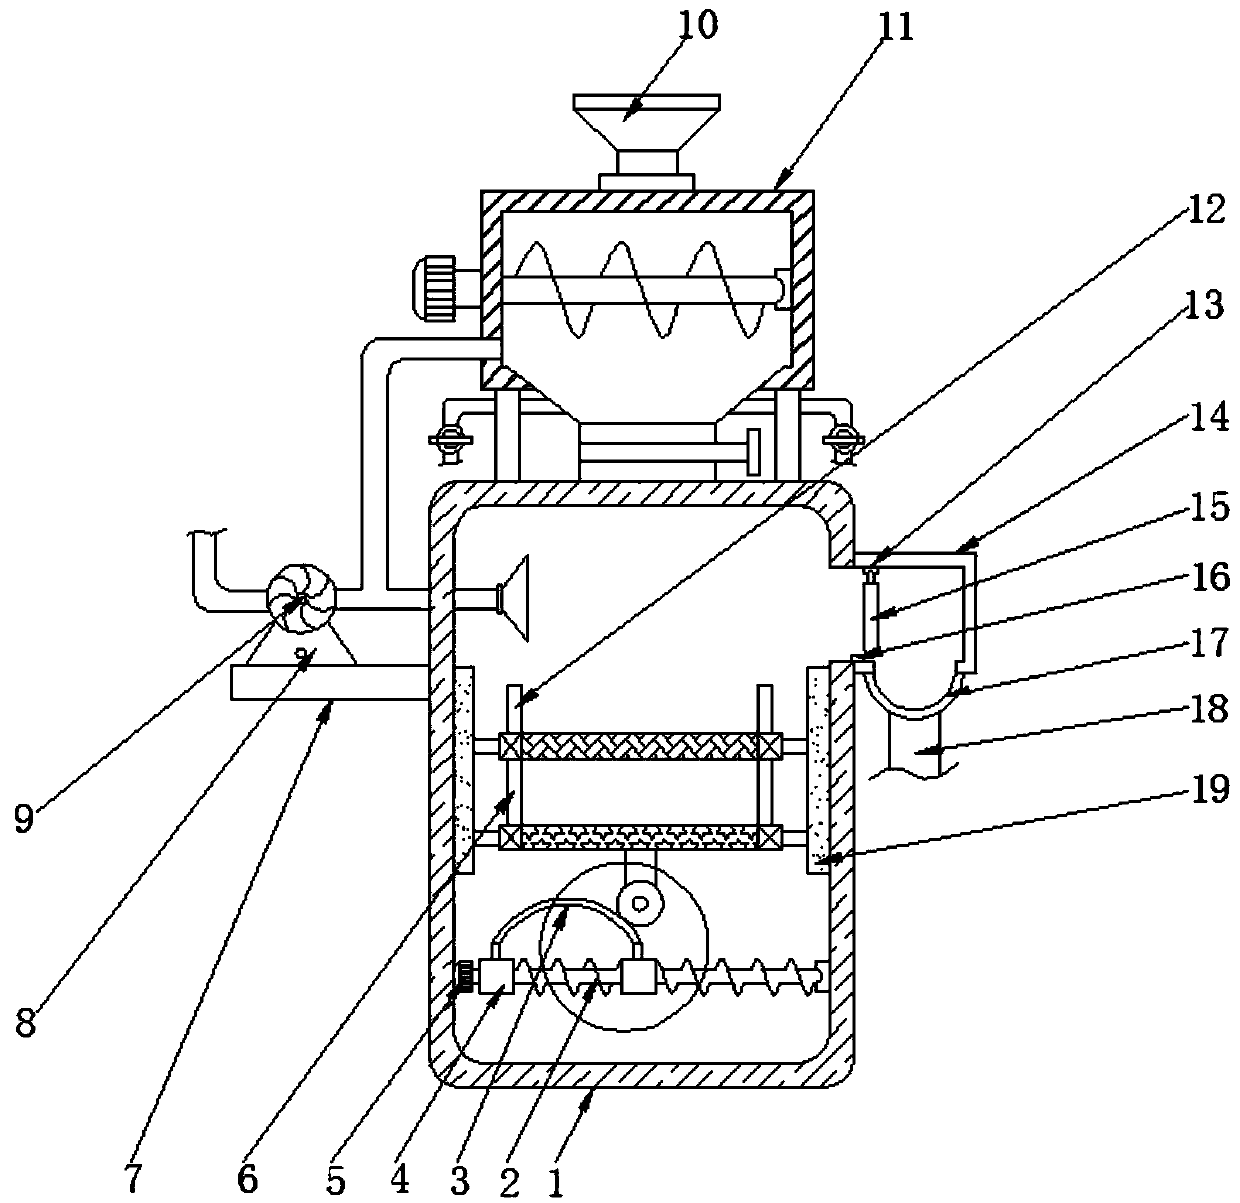 Seed screening device for agricultural experiment seedling